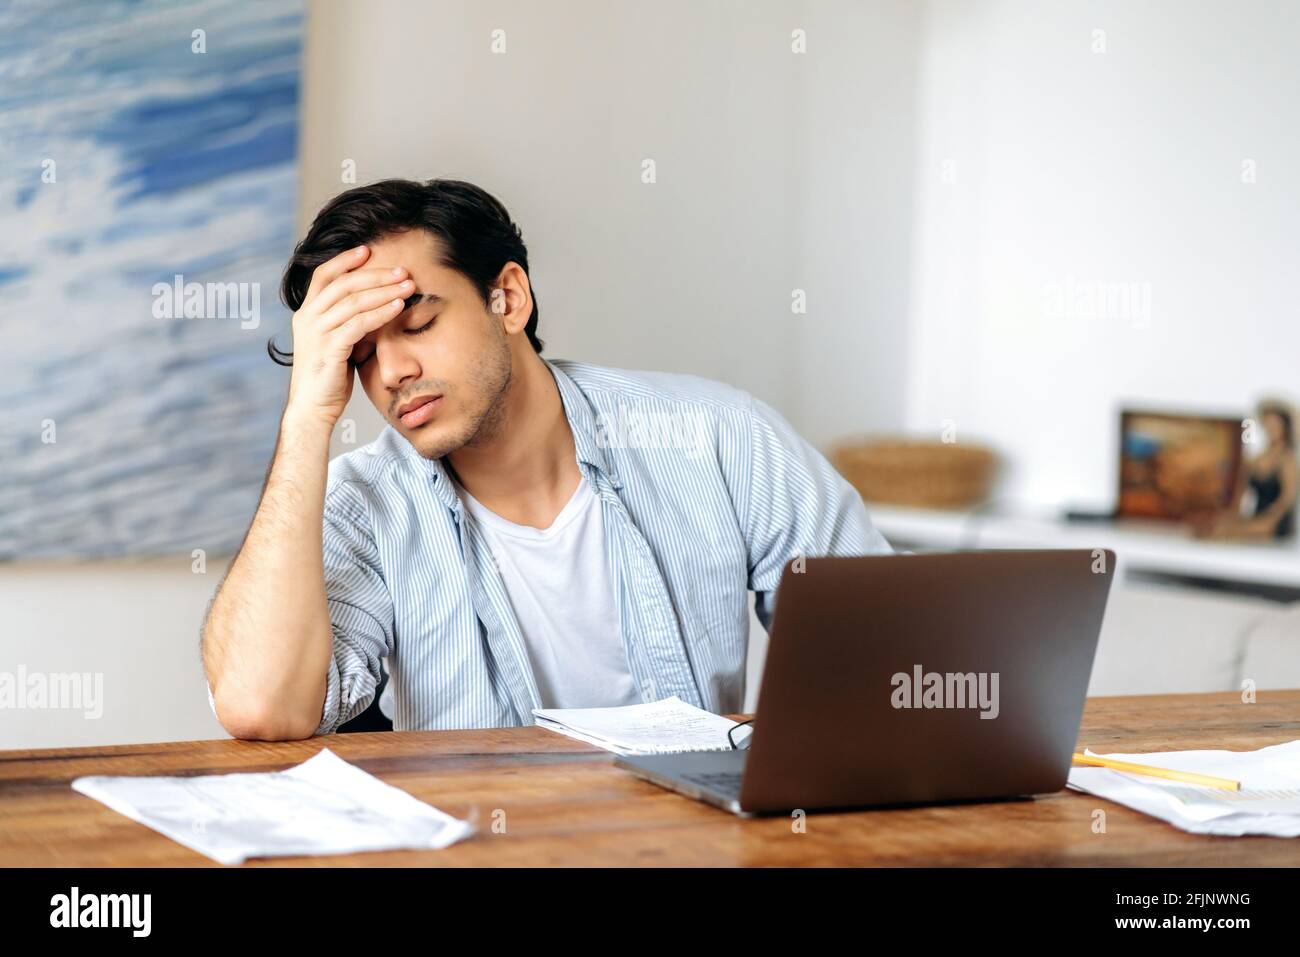 Tired jaded mixed race hispanic guy, employee, freelancer or student, in casual clothes, working or studying at laptop, experiencing stress at work, headache, need a rest, eyes closed Stock Photo